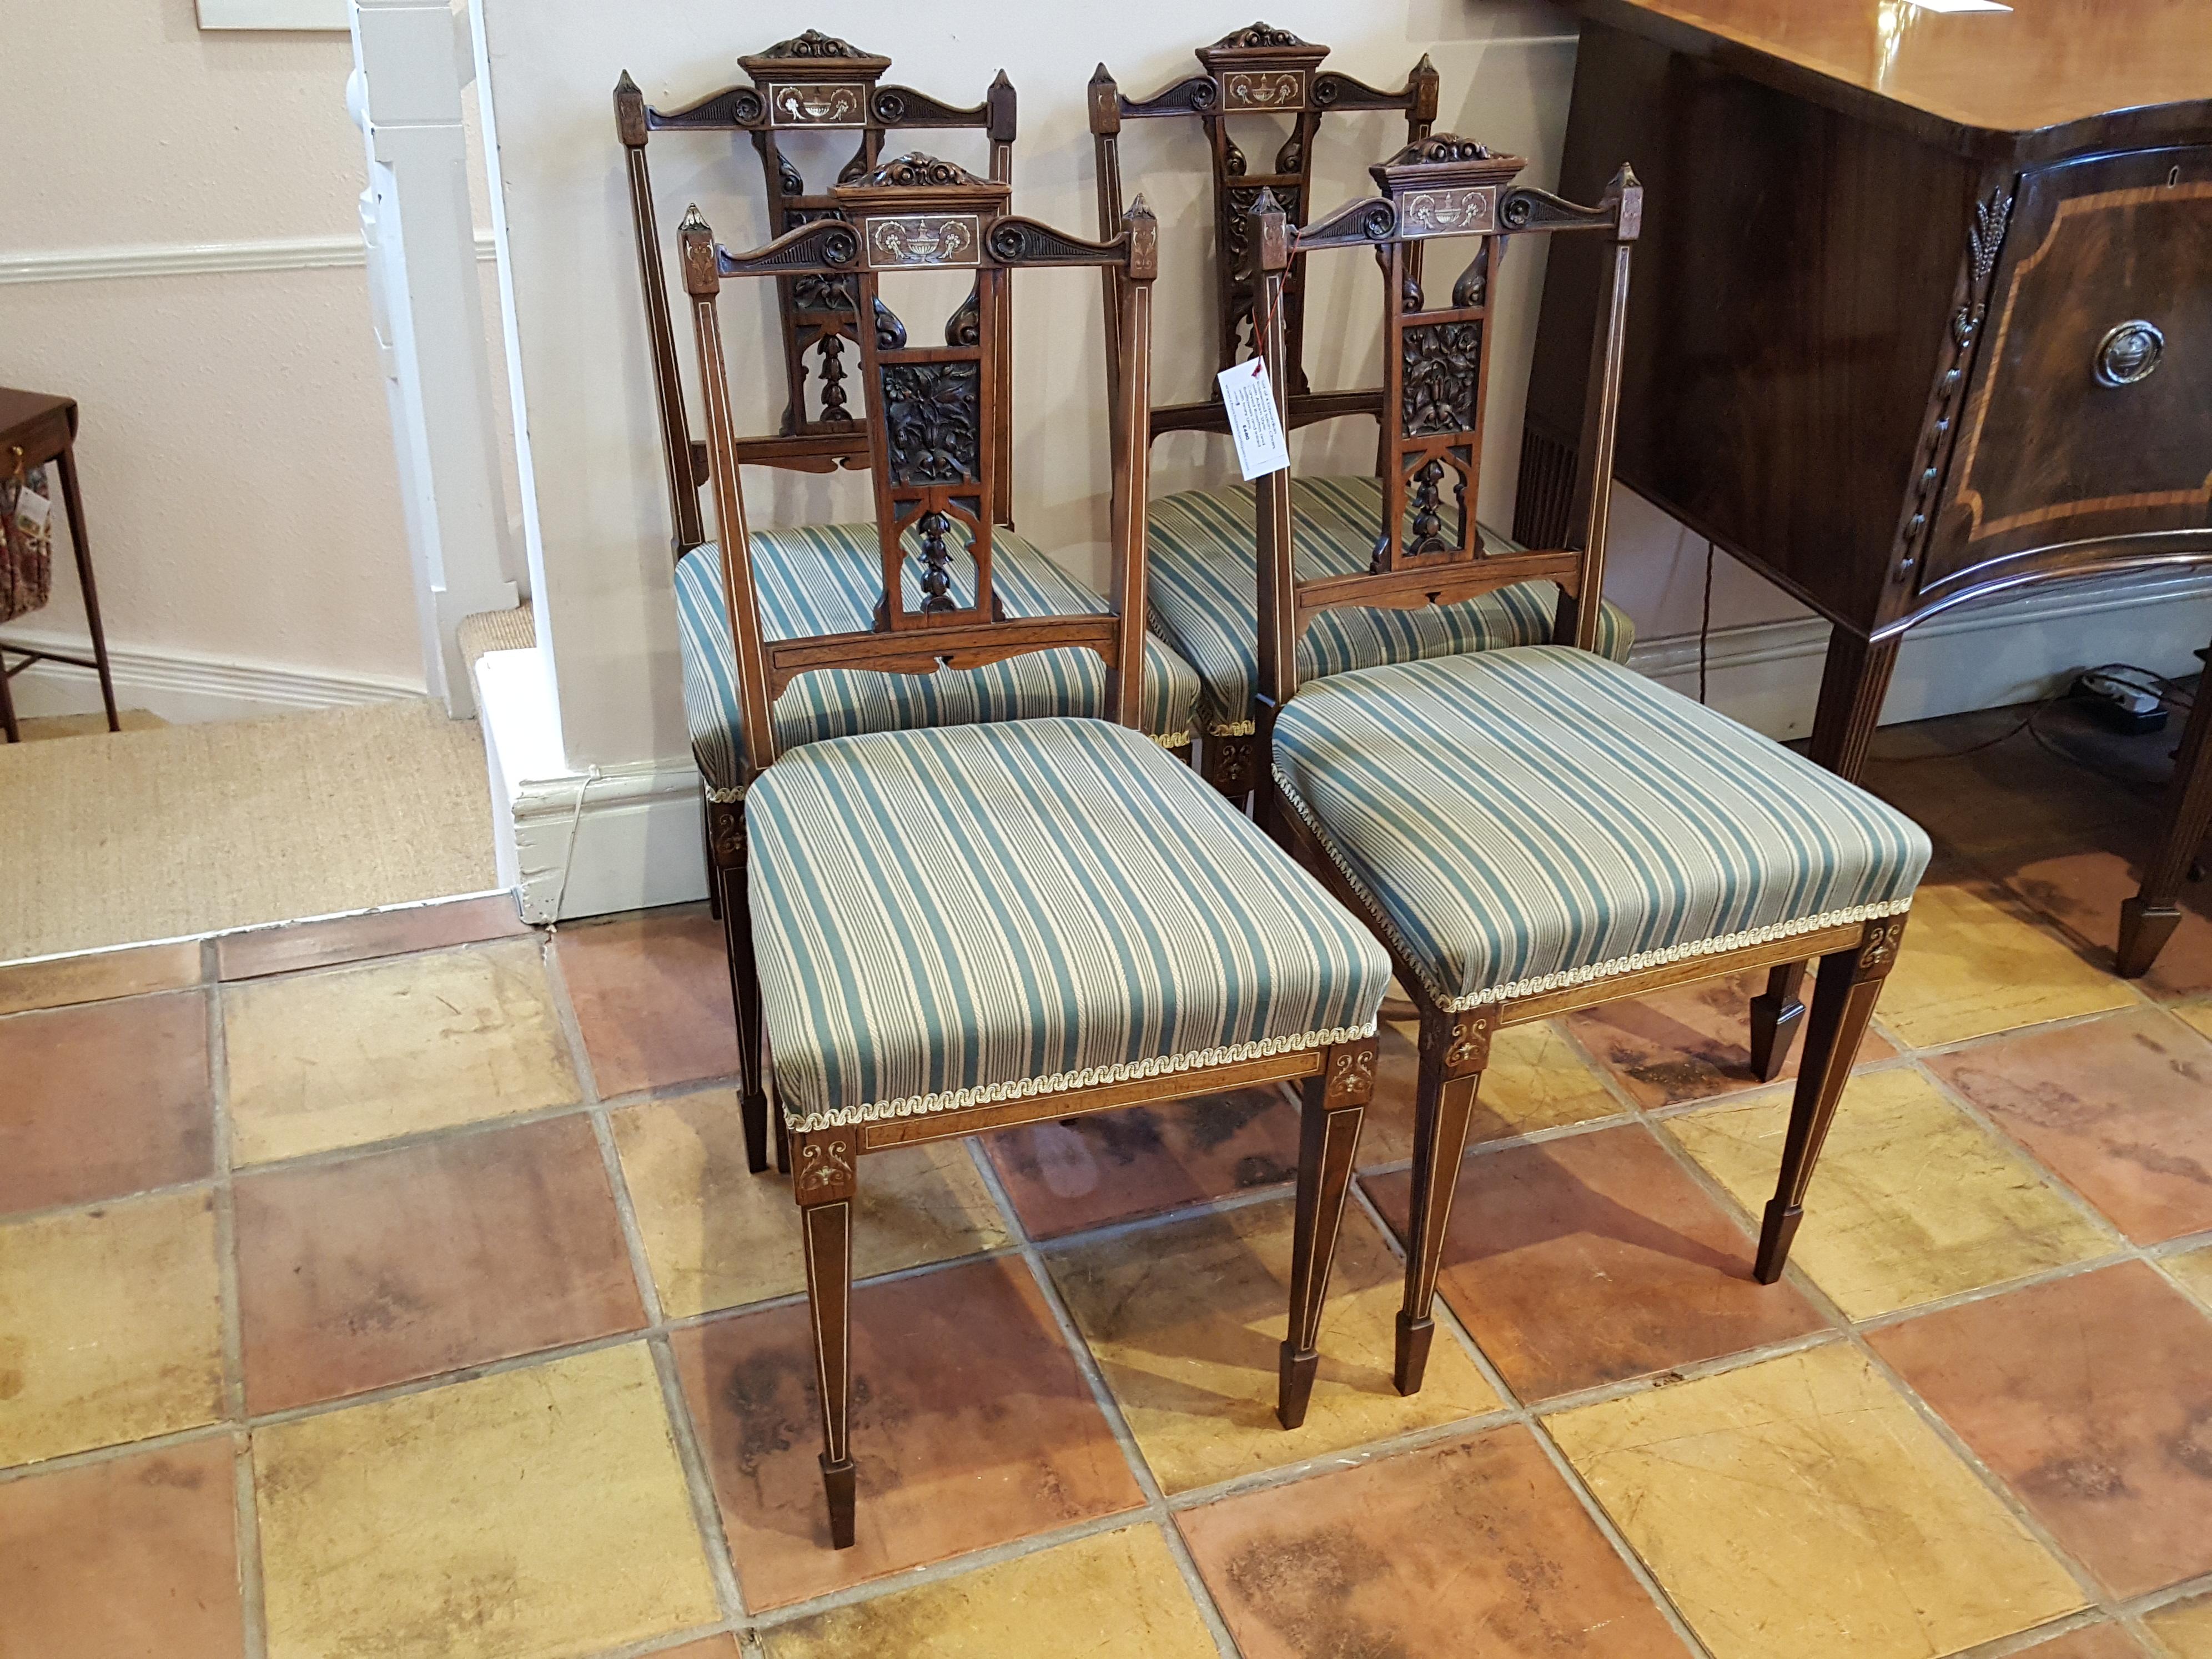 Set of 4 Edwardian rosewood salon chairs with Adam style carved rosettes and bellflowers and Inlaid with ivory urns
Measures: 18